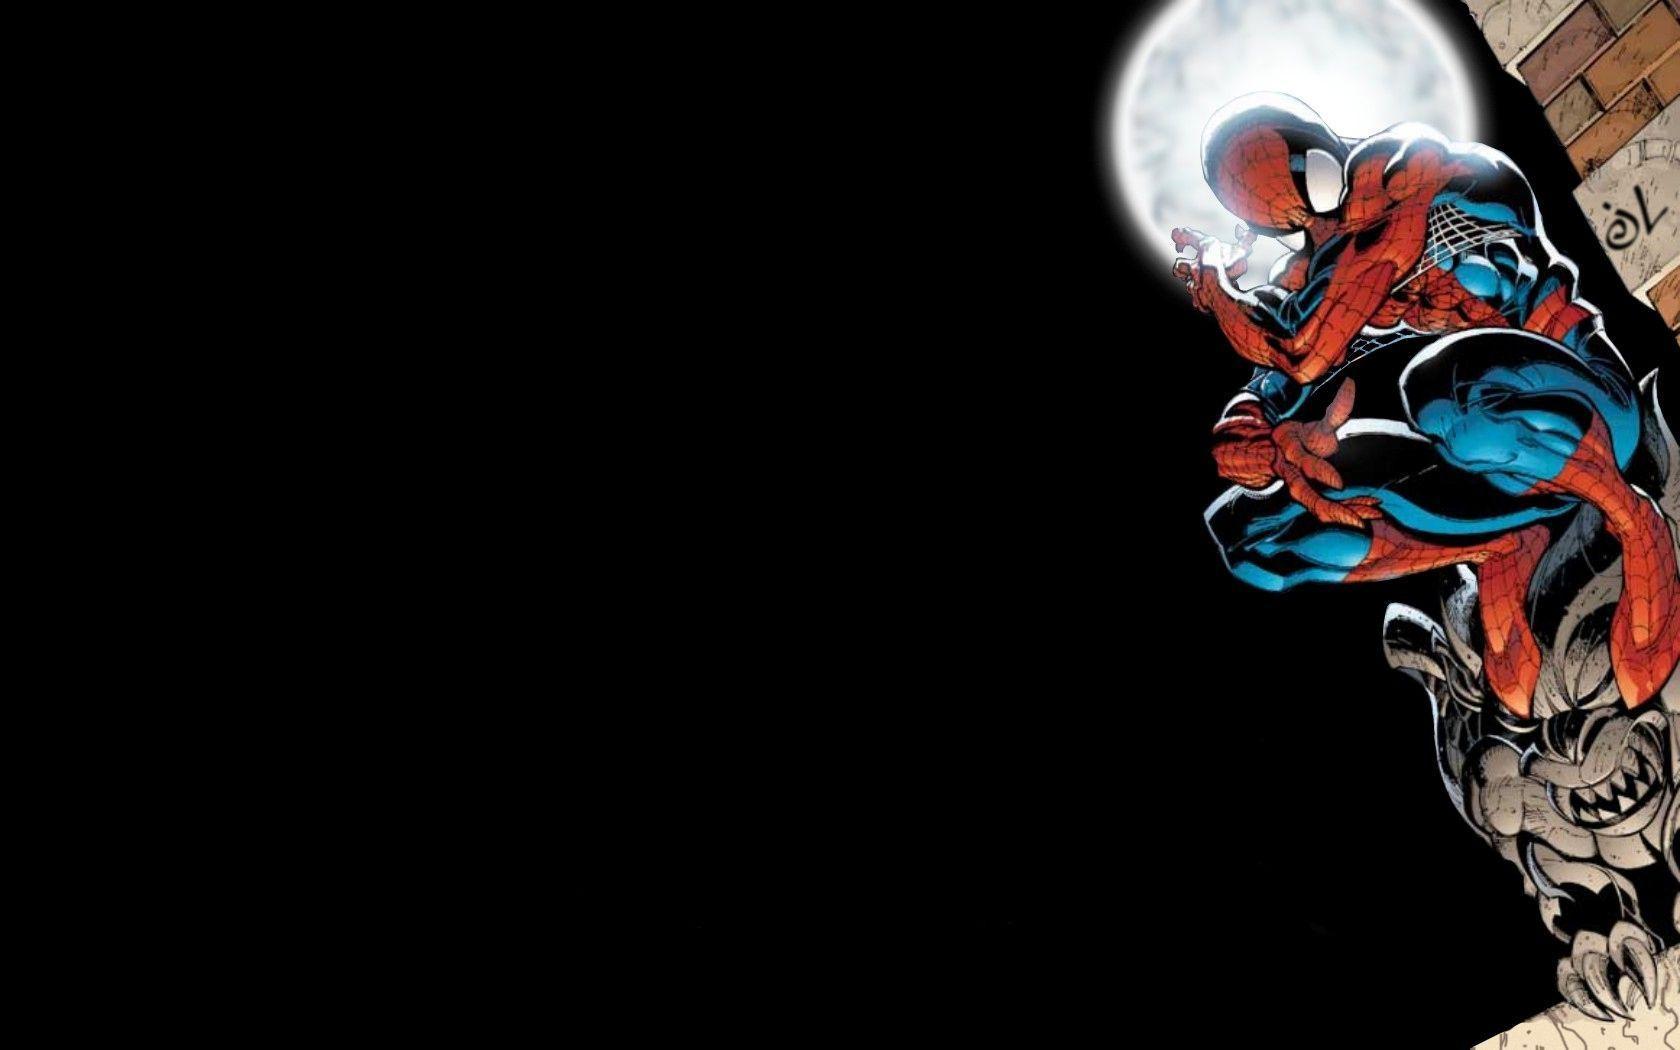 Image For Marvel Spiderman Wallpapers Hd.